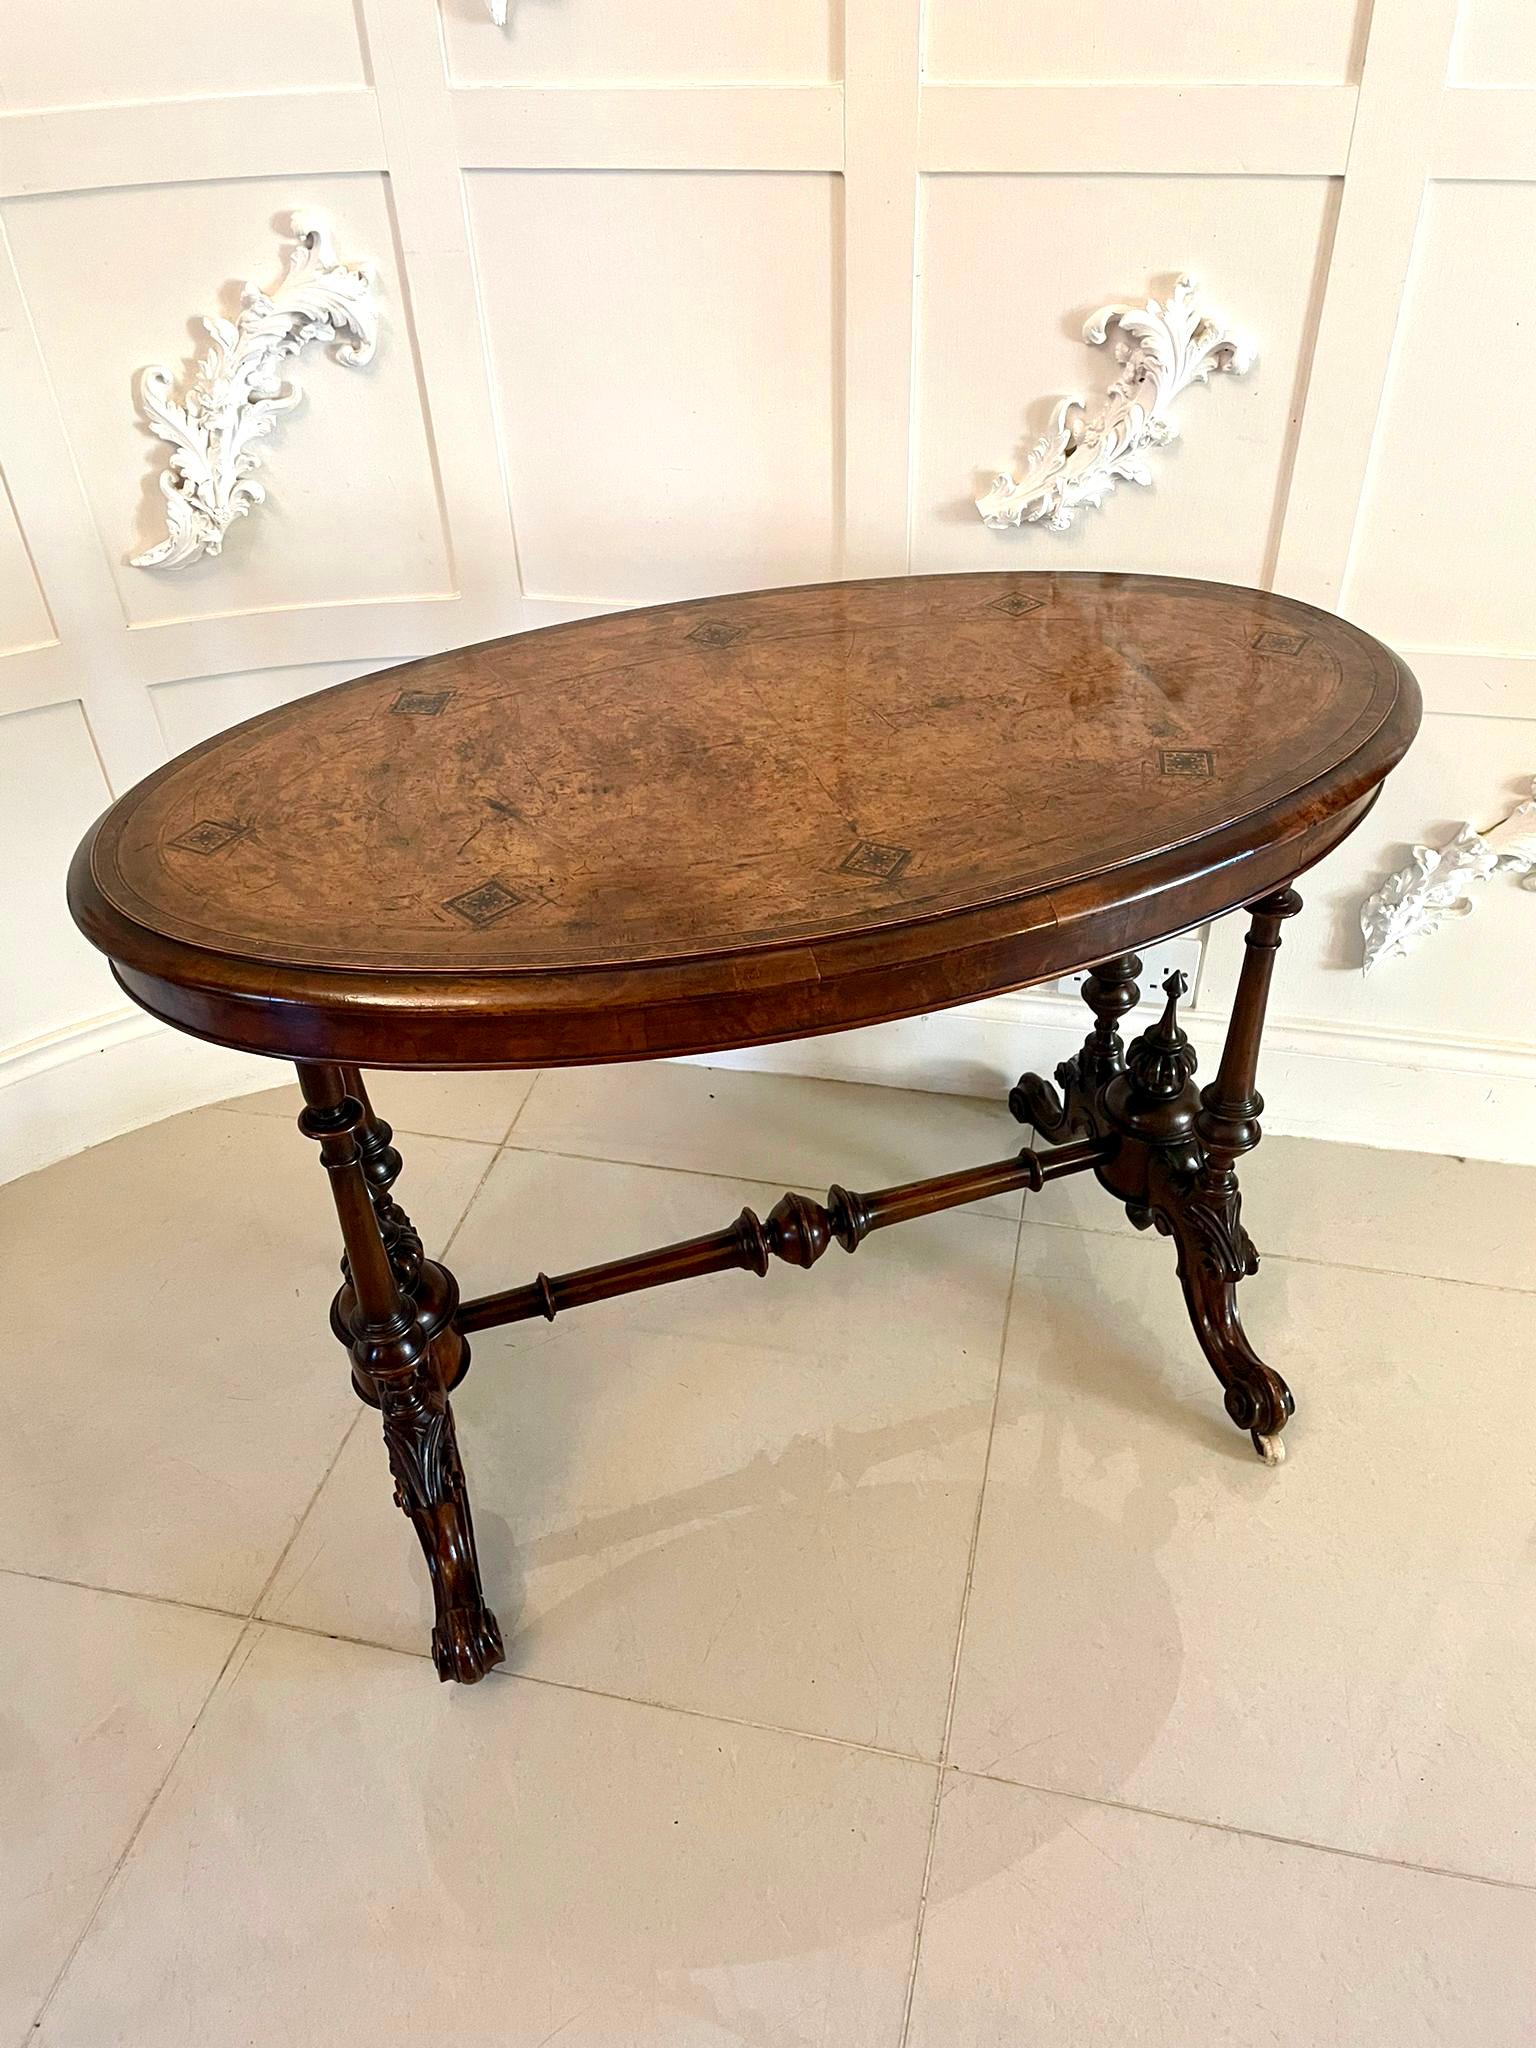 Antique Victorian quality burr walnut inlaid oval centre table having an oval quality burr walnut Tunbridgeware inlaid top with a moulded edge, oval frieze supported by four turned shaped solid walnut columns, carved walnut finials and standing on